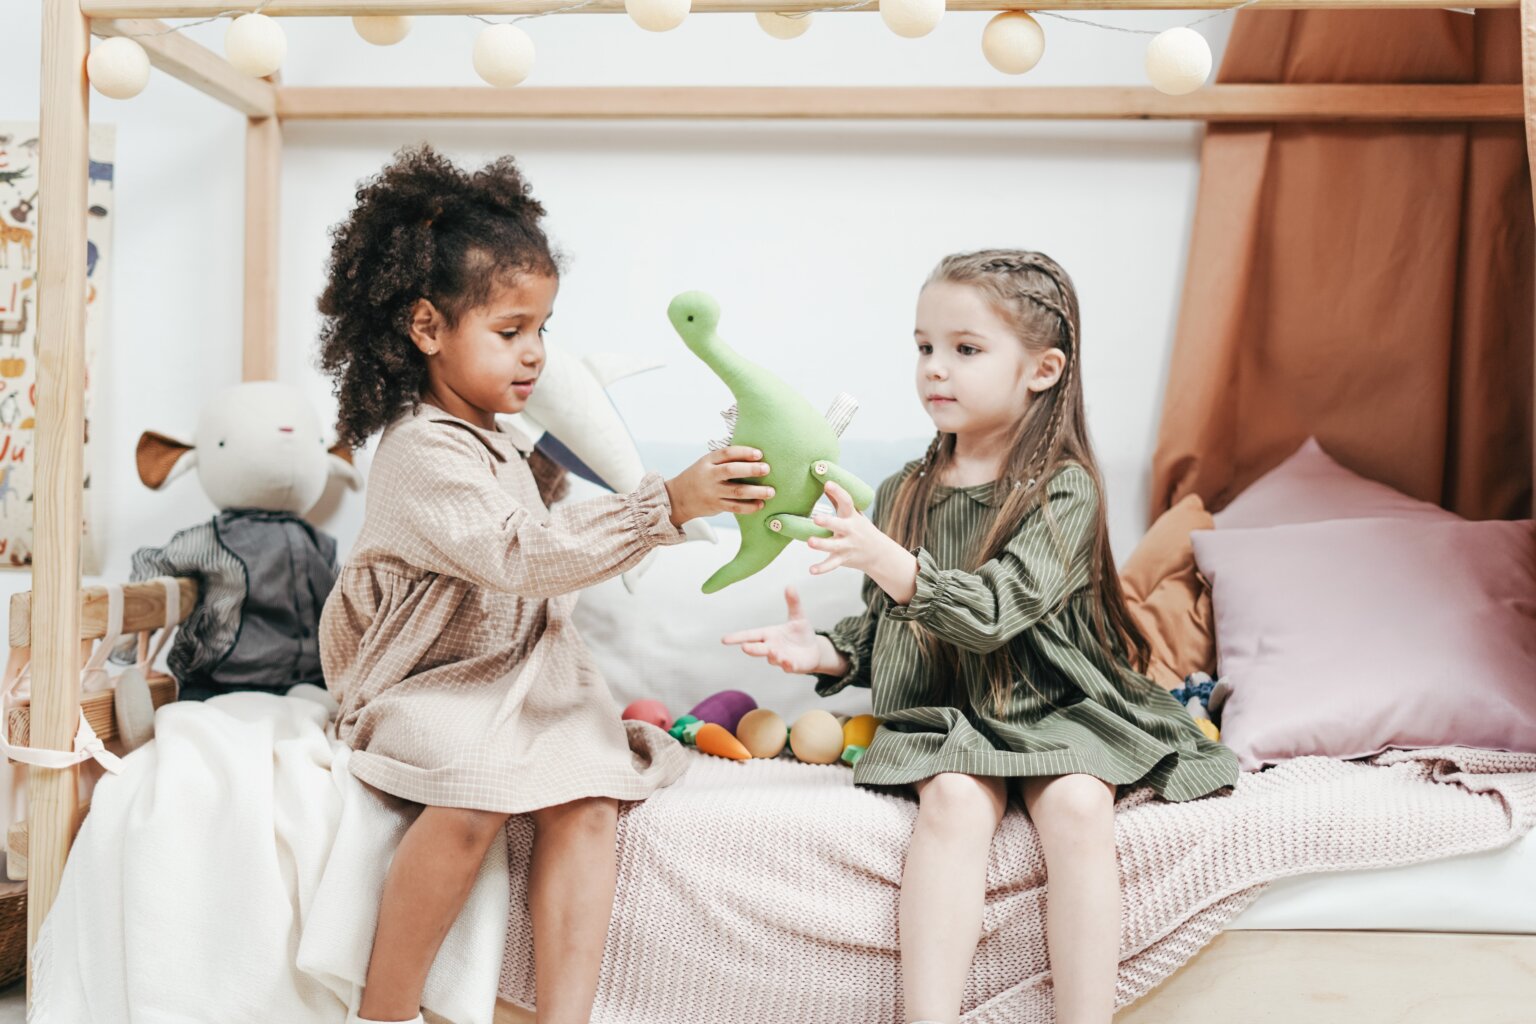 Two young girls holding a stuffed toy dinosaur between them.